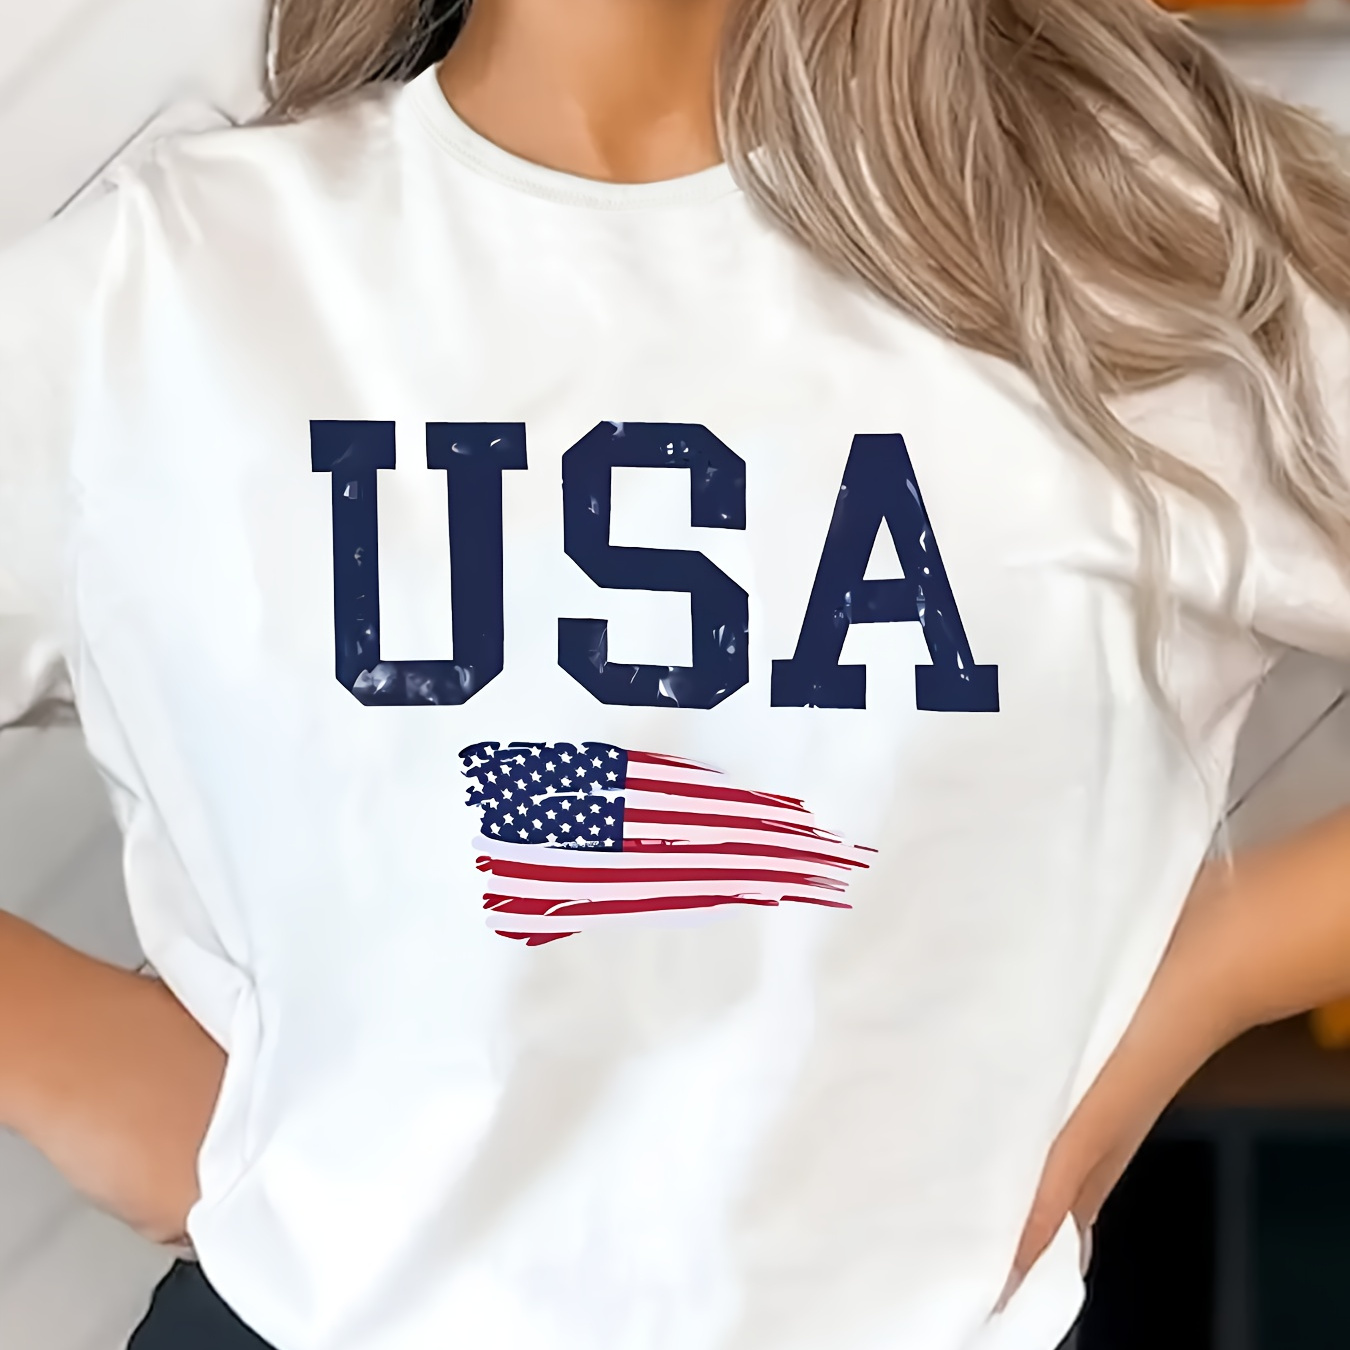 

1pc Women's Patriotic Graphic Casual T-shirt, Usa Flag Print, Fashion Short Sleeve Top, Sporty Style, White Tee, American